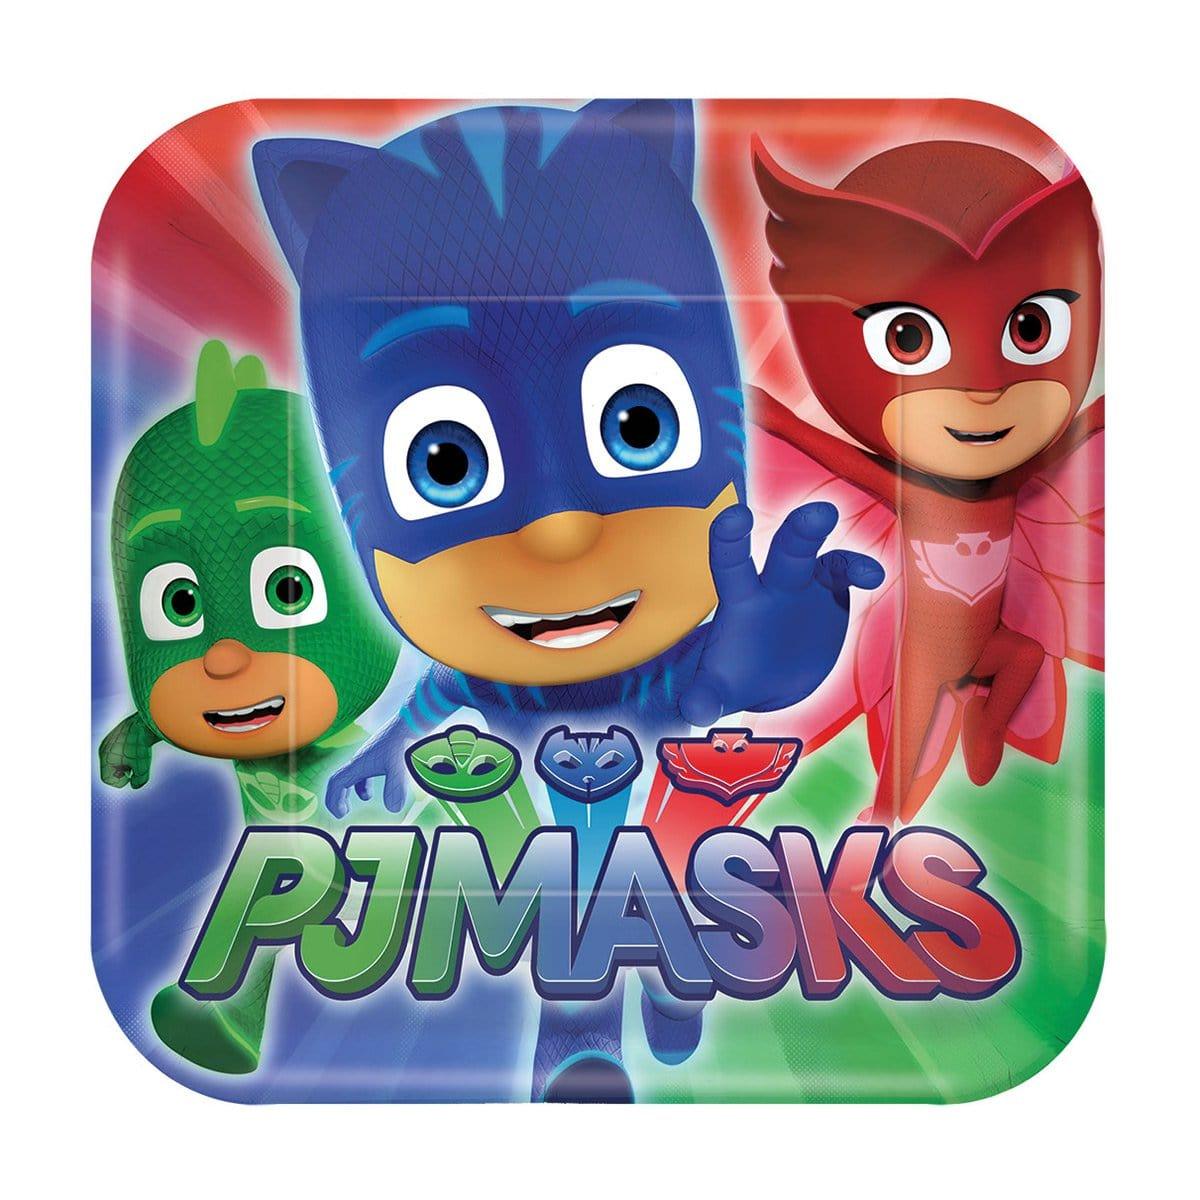 Buy Kids Birthday PJ Masks Dessert Plates 7 inches, 8 per package sold at Party Expert